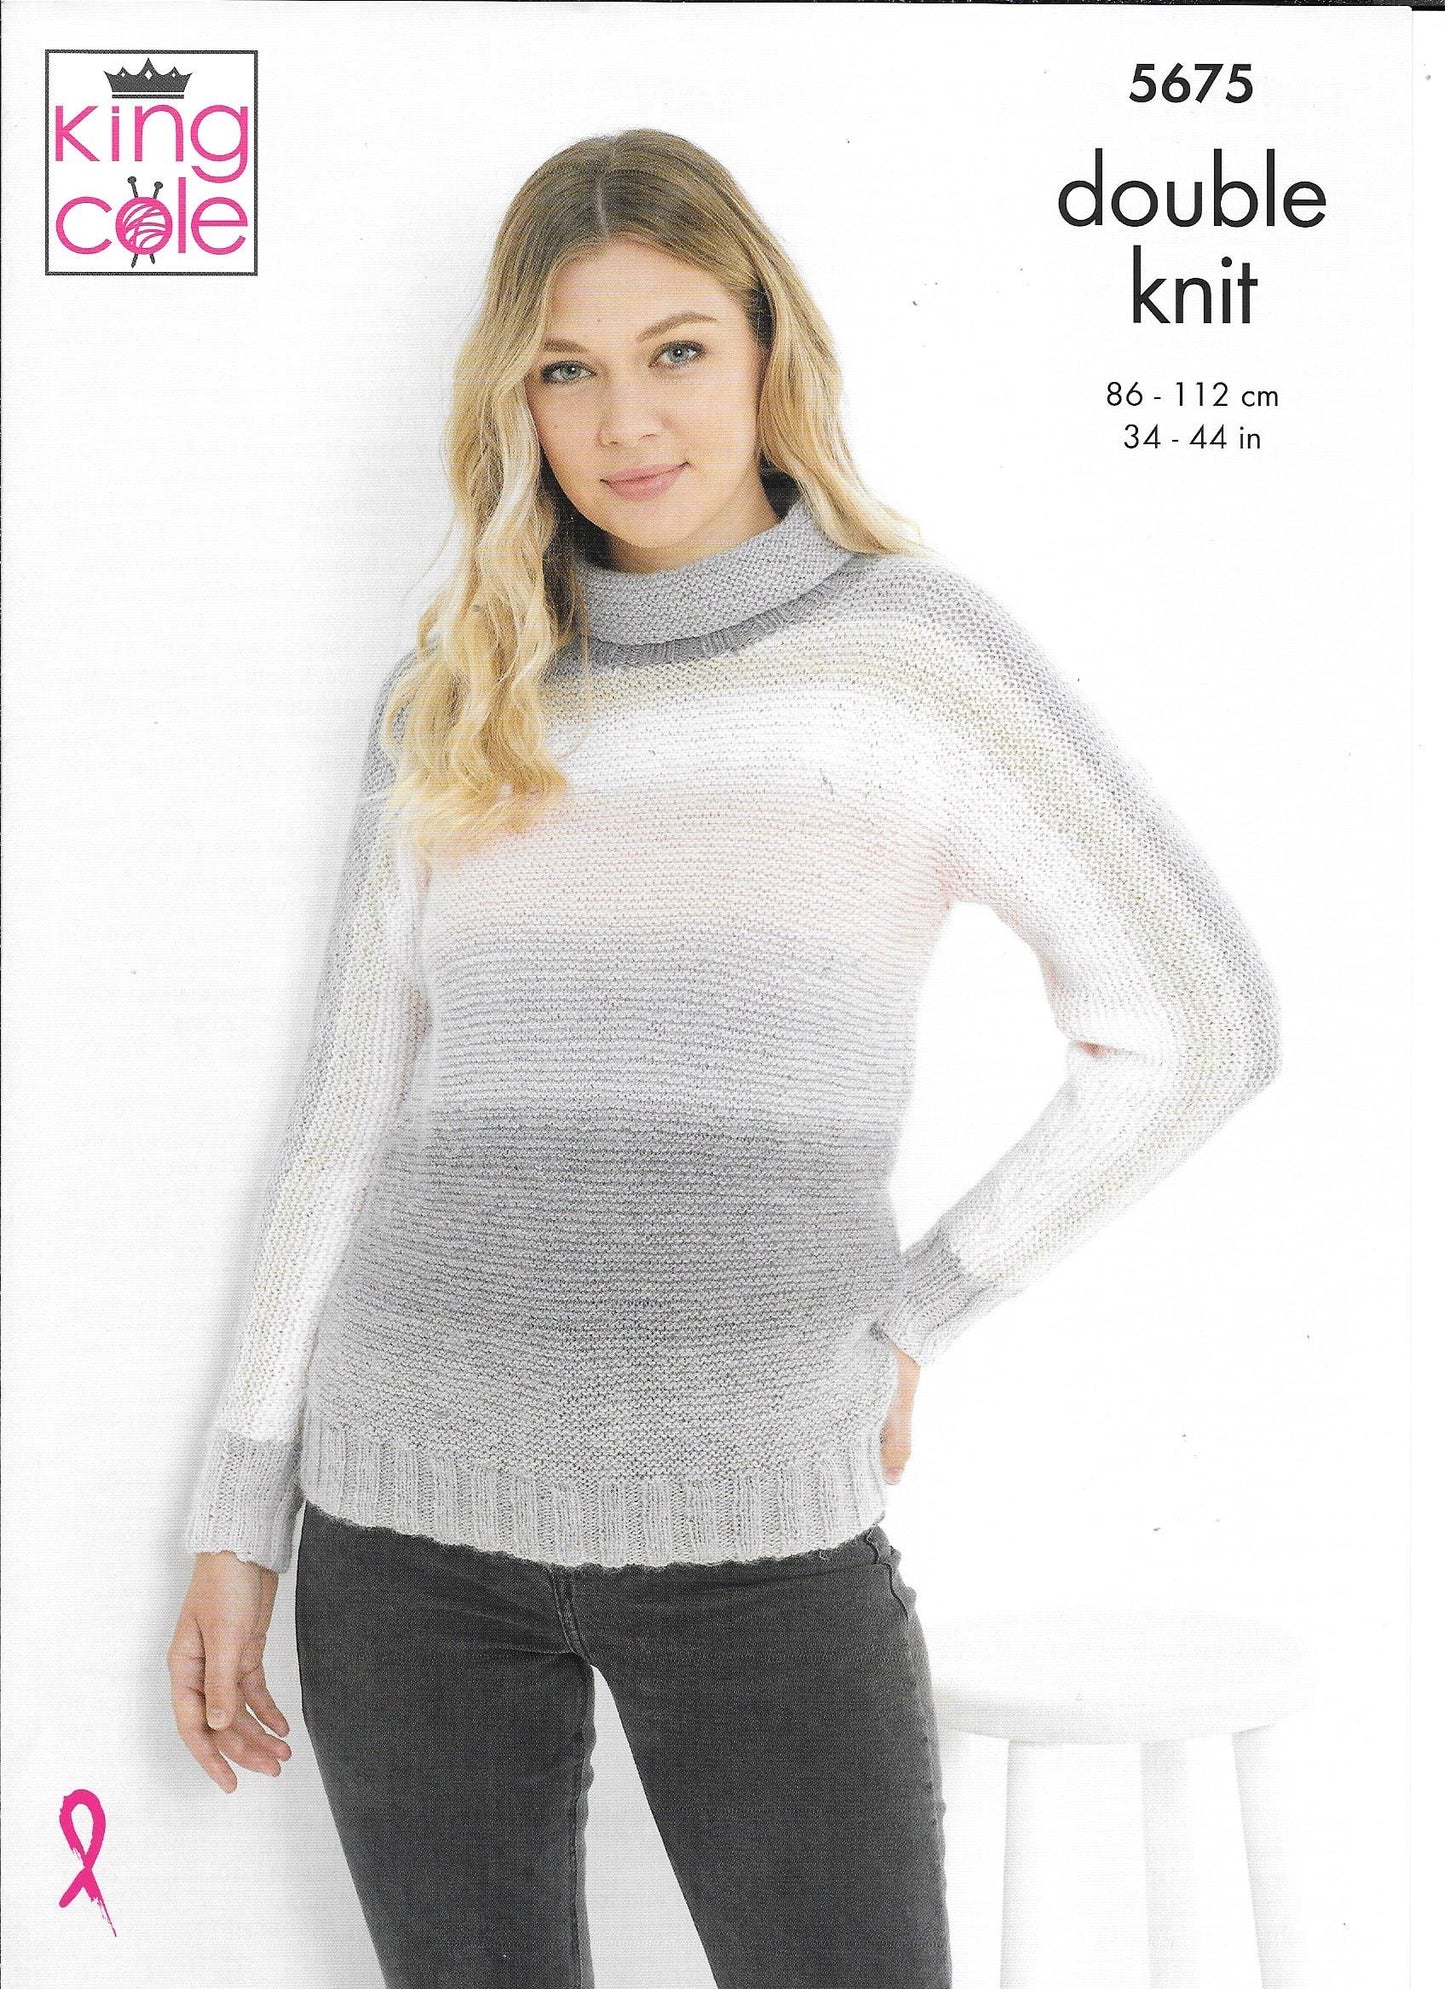 5675 King Cole Curiosity dk ladies cardigan and sweater knitting pattern